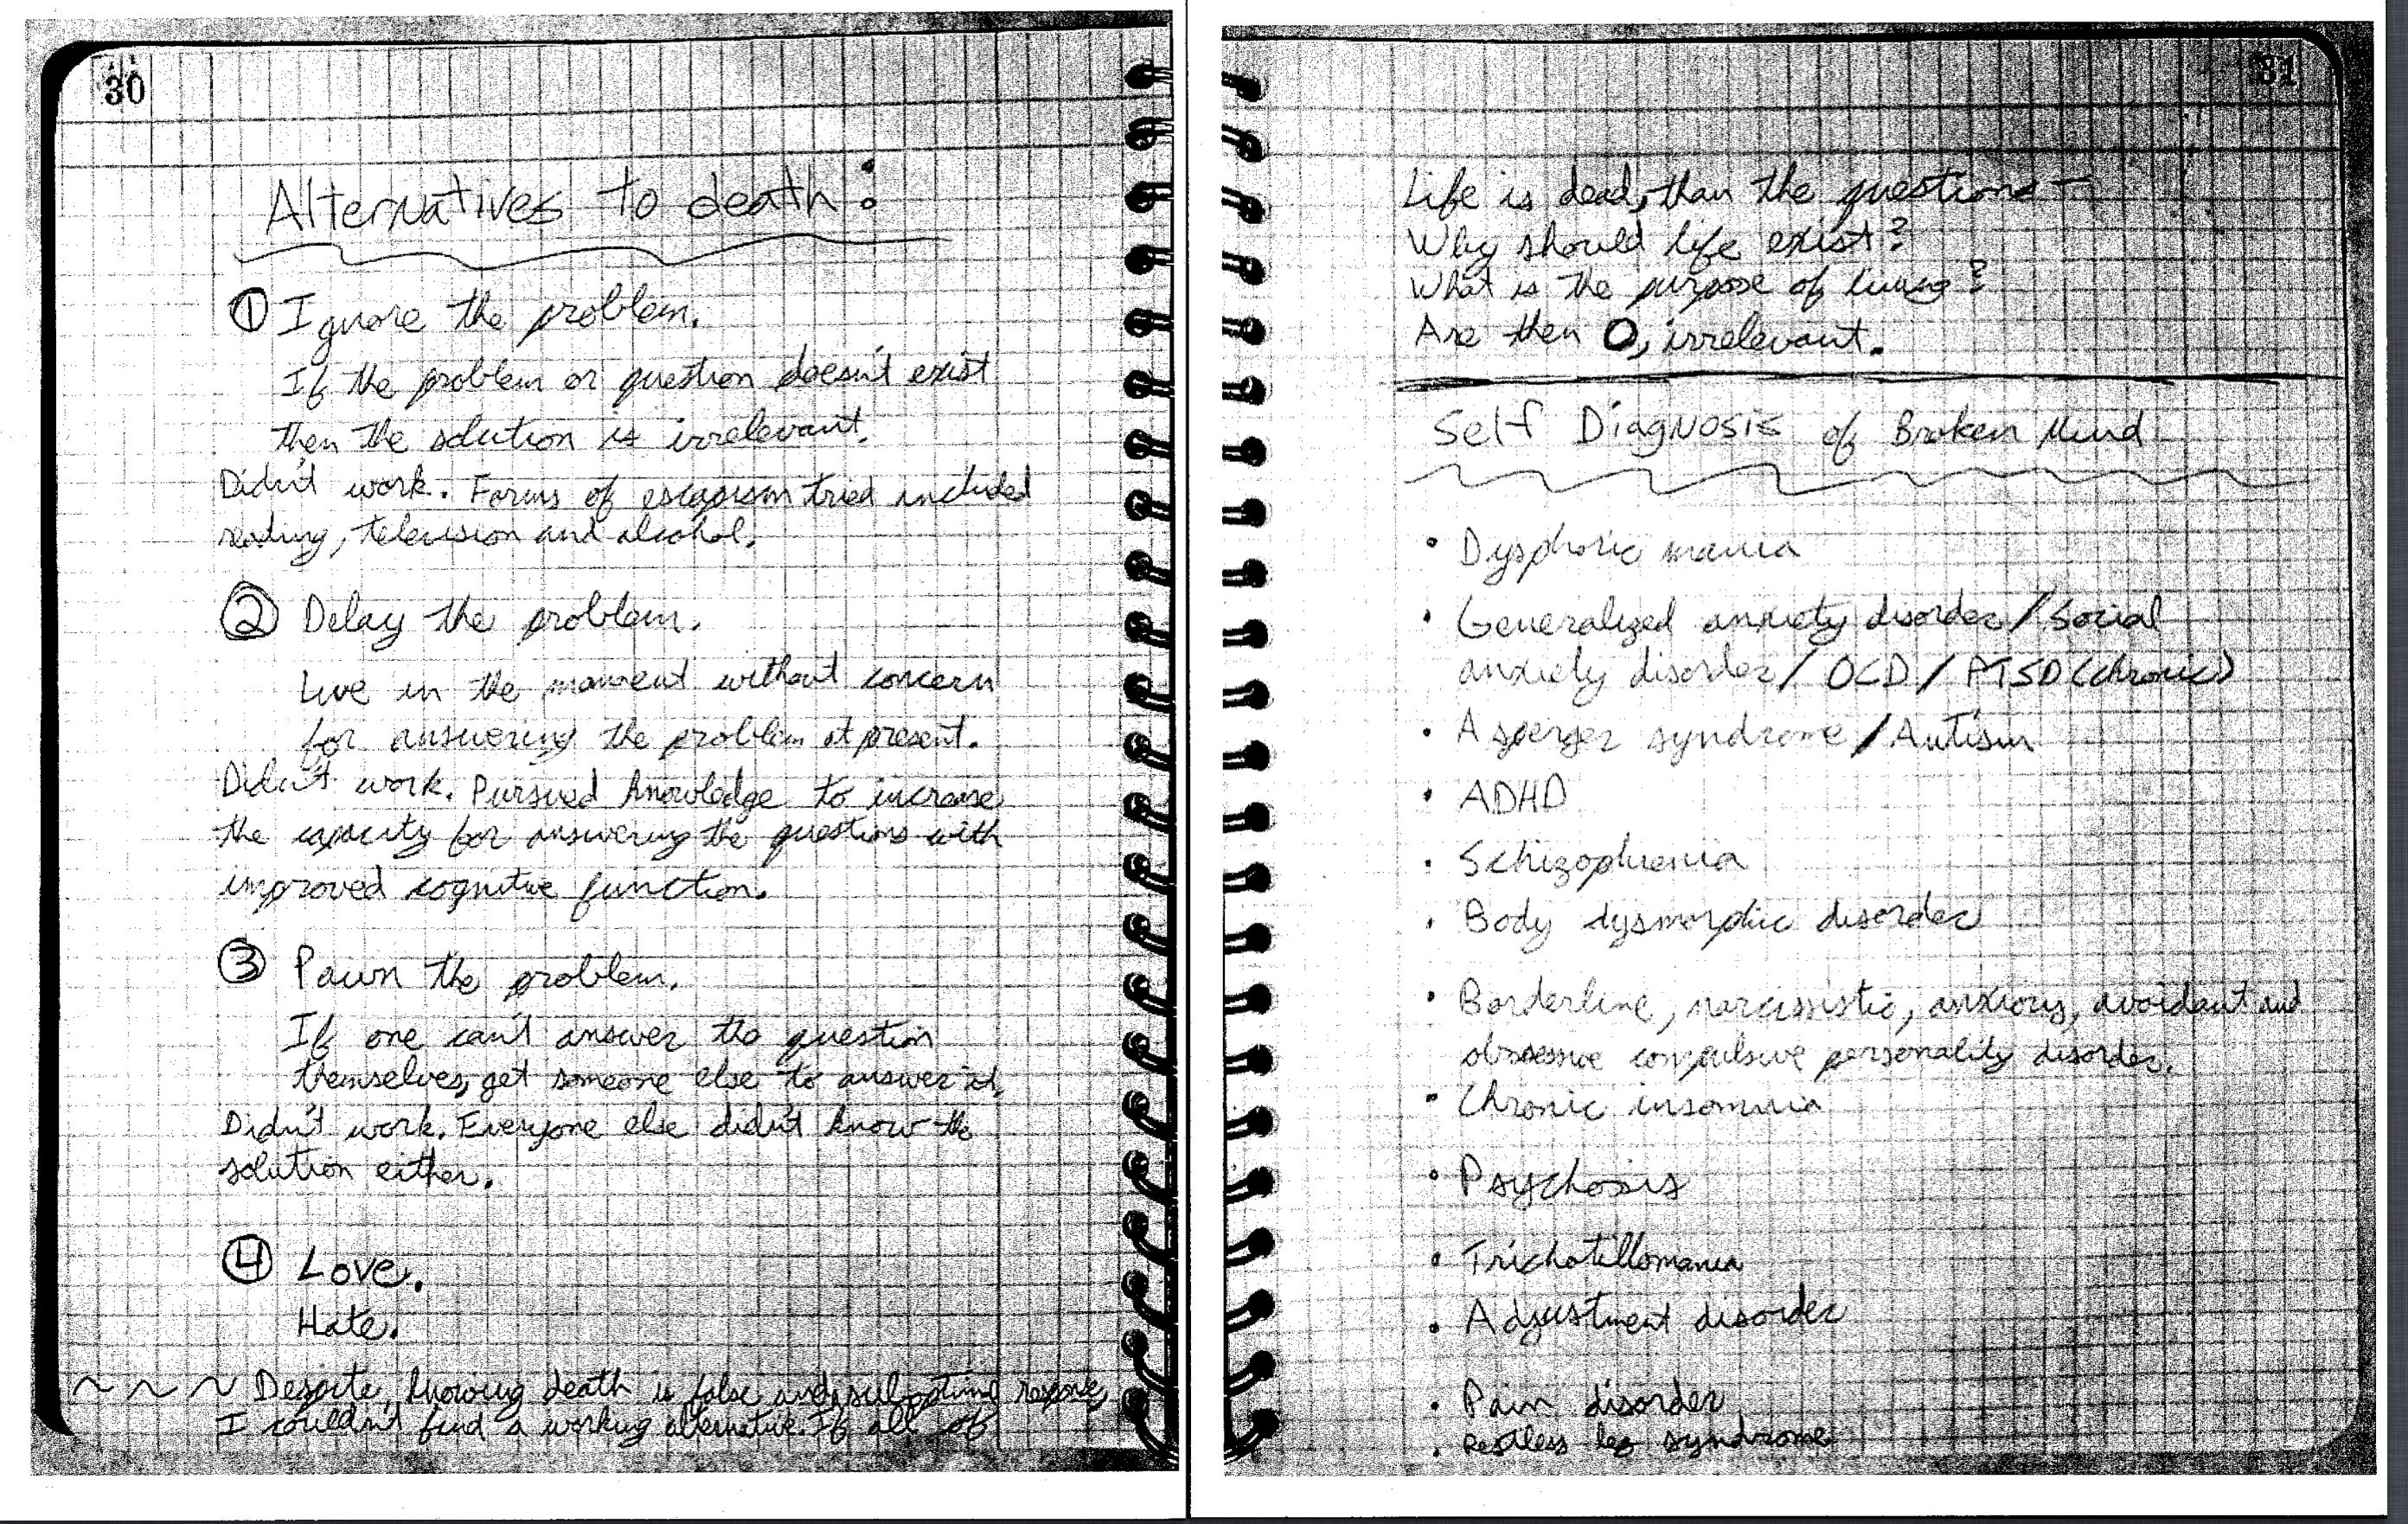 A portion of Aurora shooter James Holmes' notebook, after it was presented as evidence in the Holmes murder trial on May 26, 2015, in Centennial, Colo. (AP)